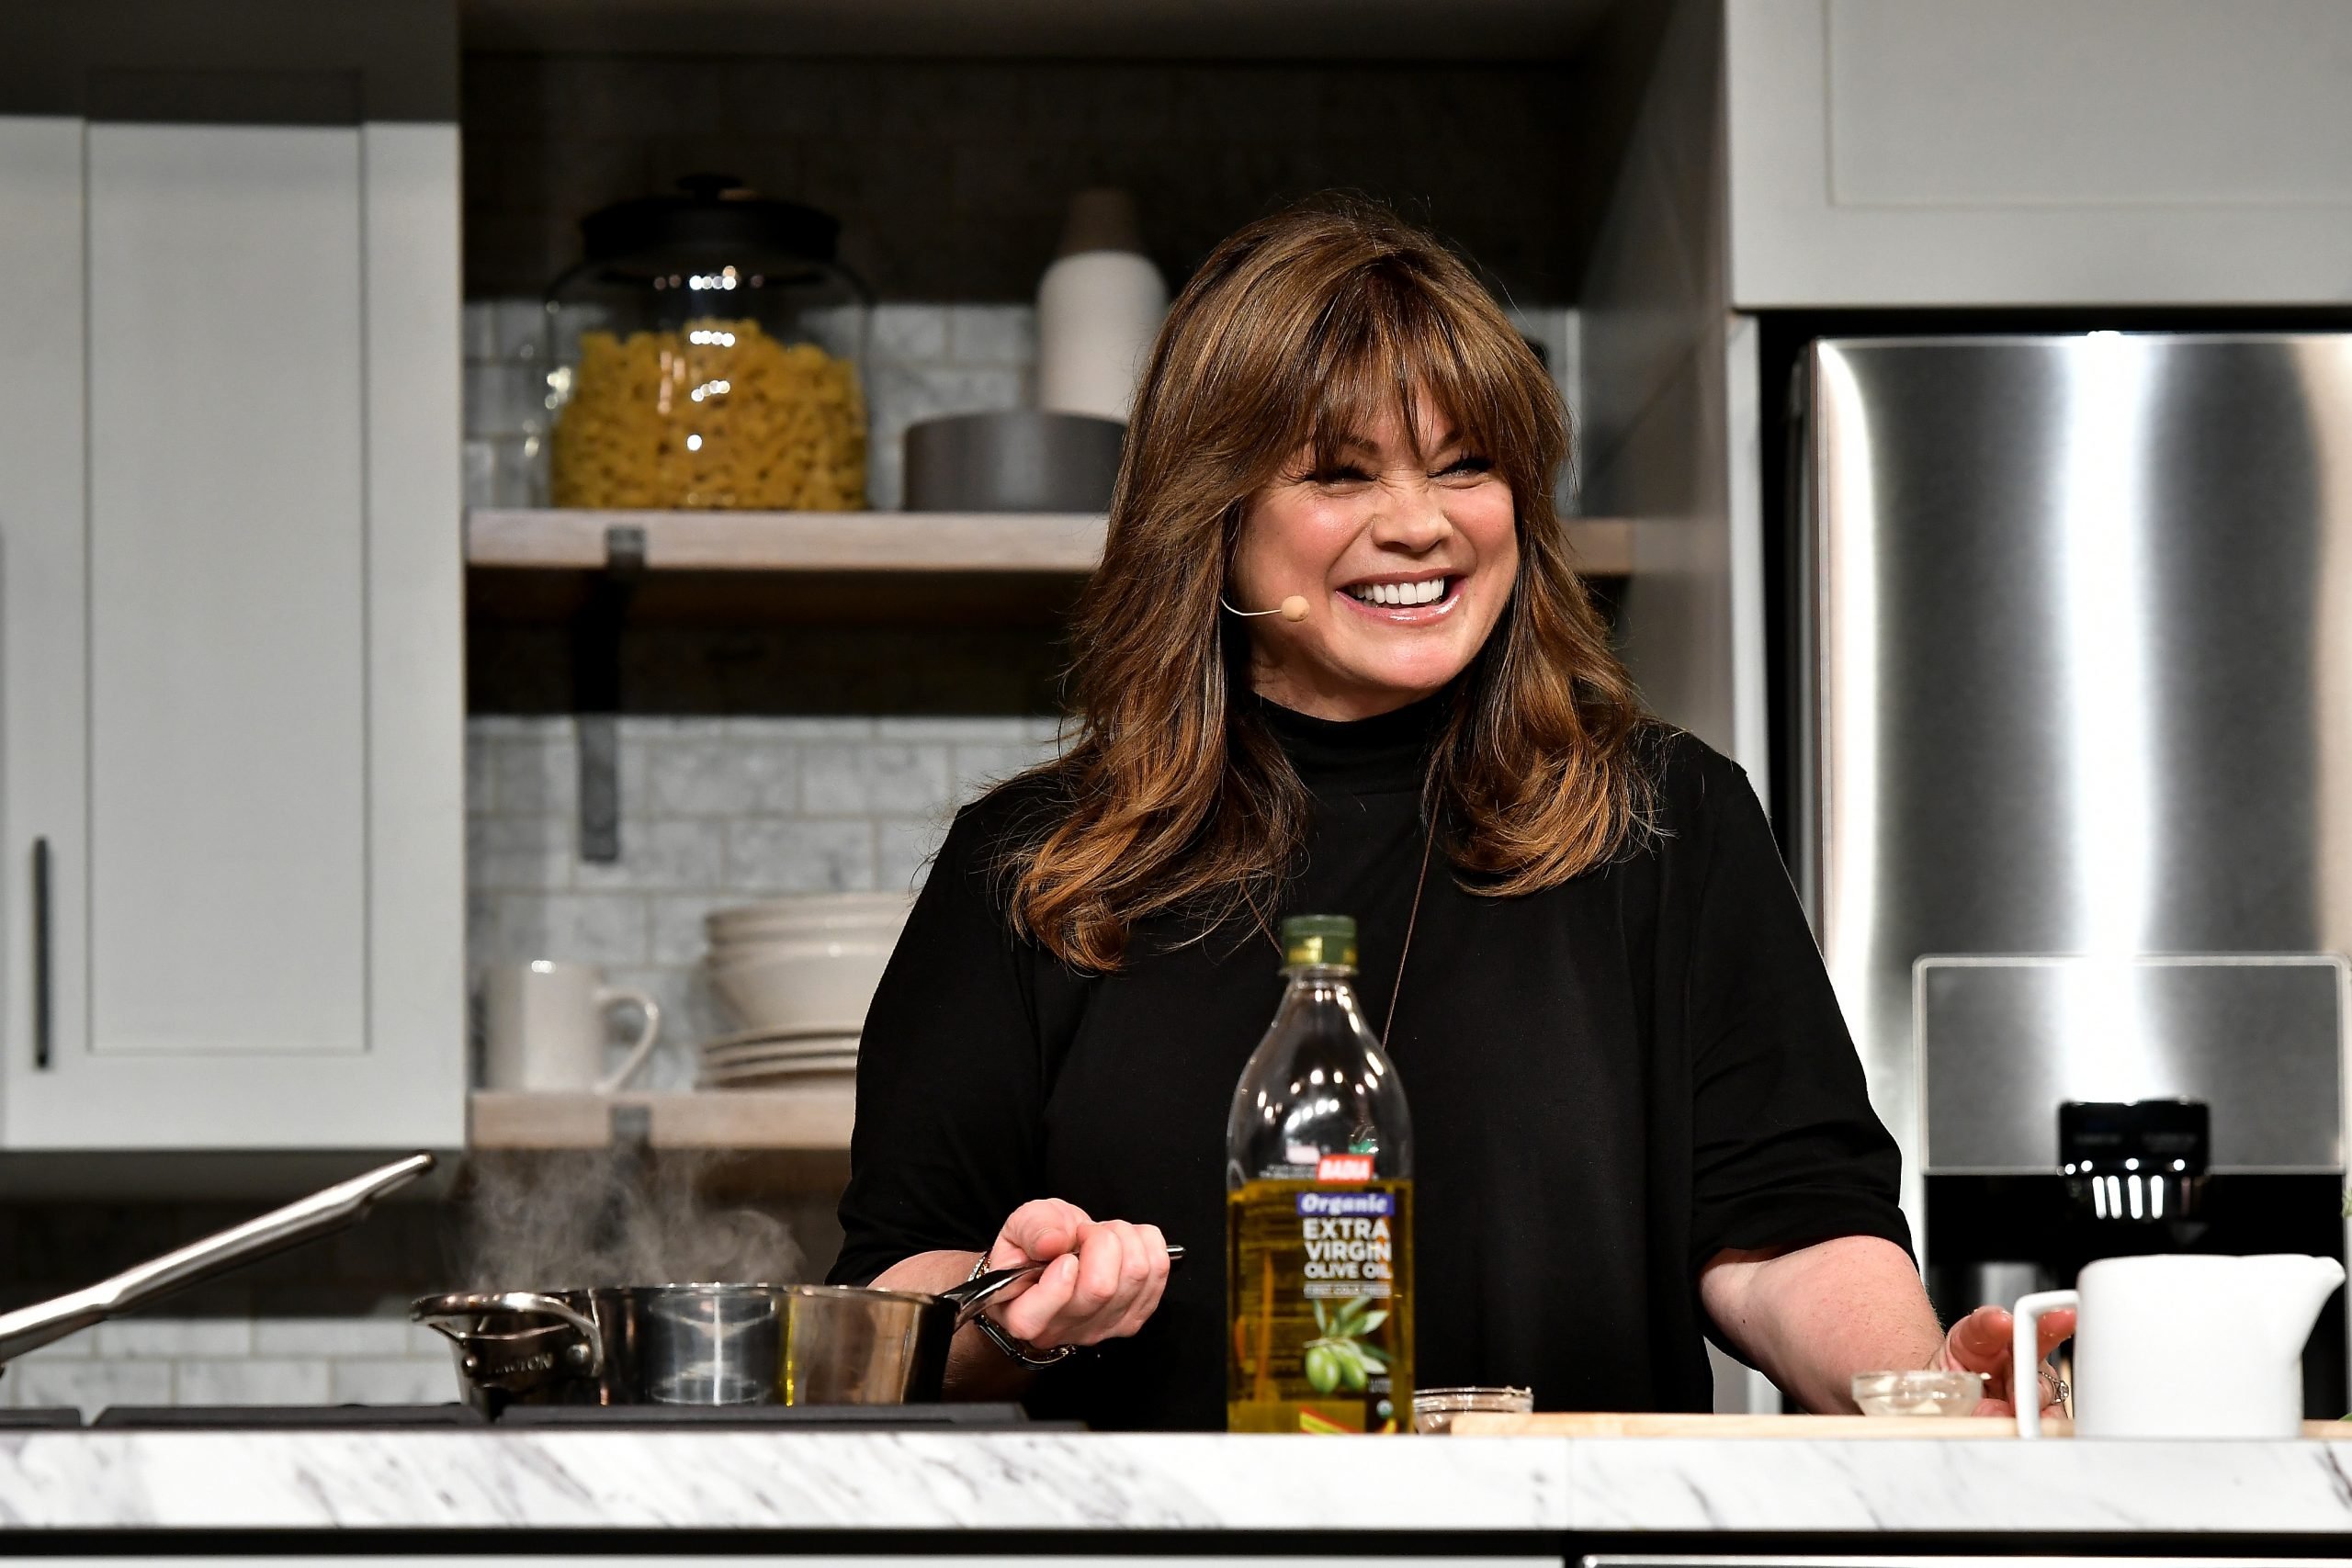 Food Network personality Valerie Bertinelli prepares a meal at a network-hosted event in 2017.